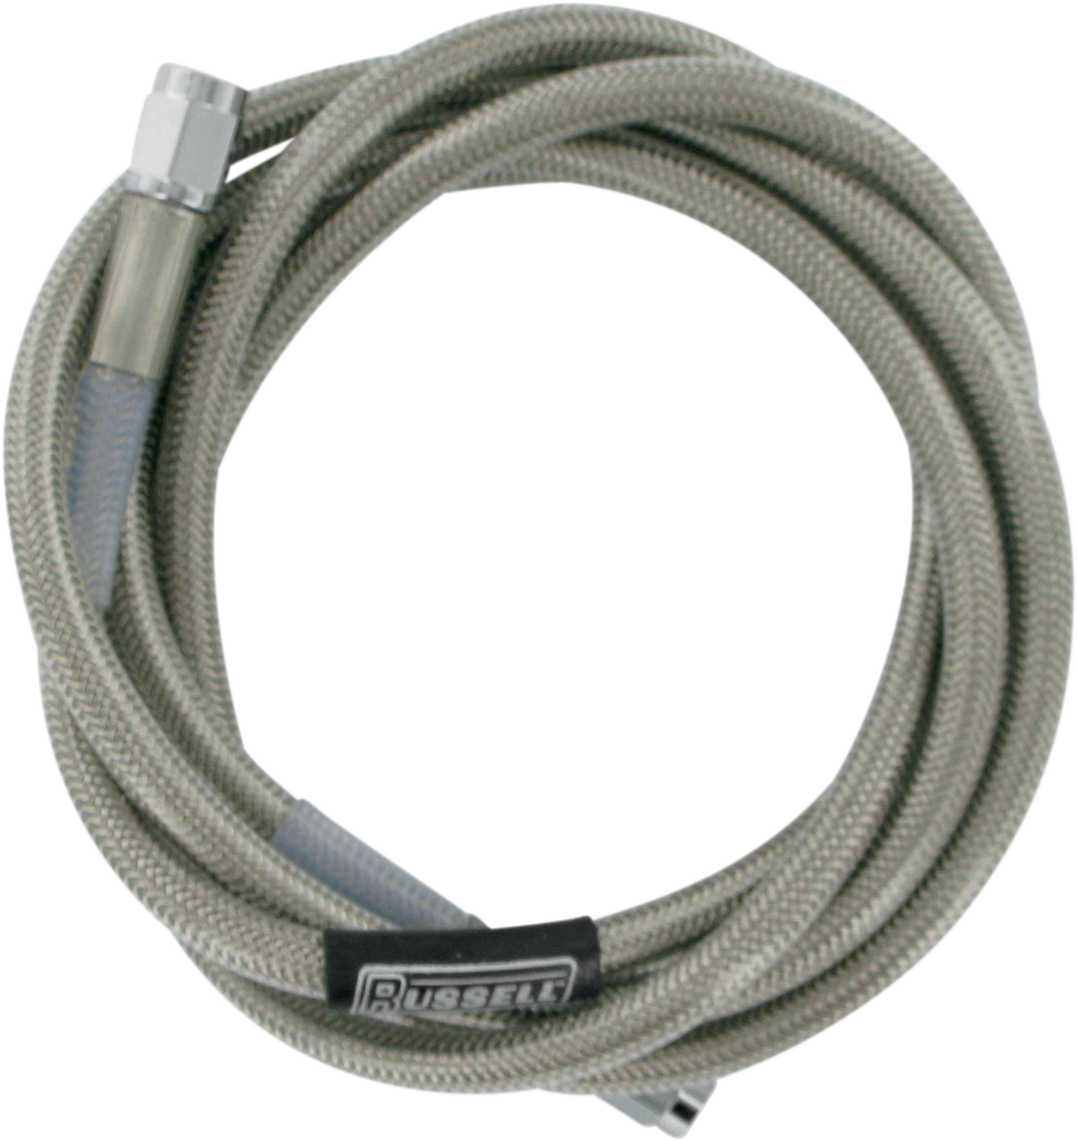 58322S - RUSSELL Stainless Steel Brake Line - 66" R58322S